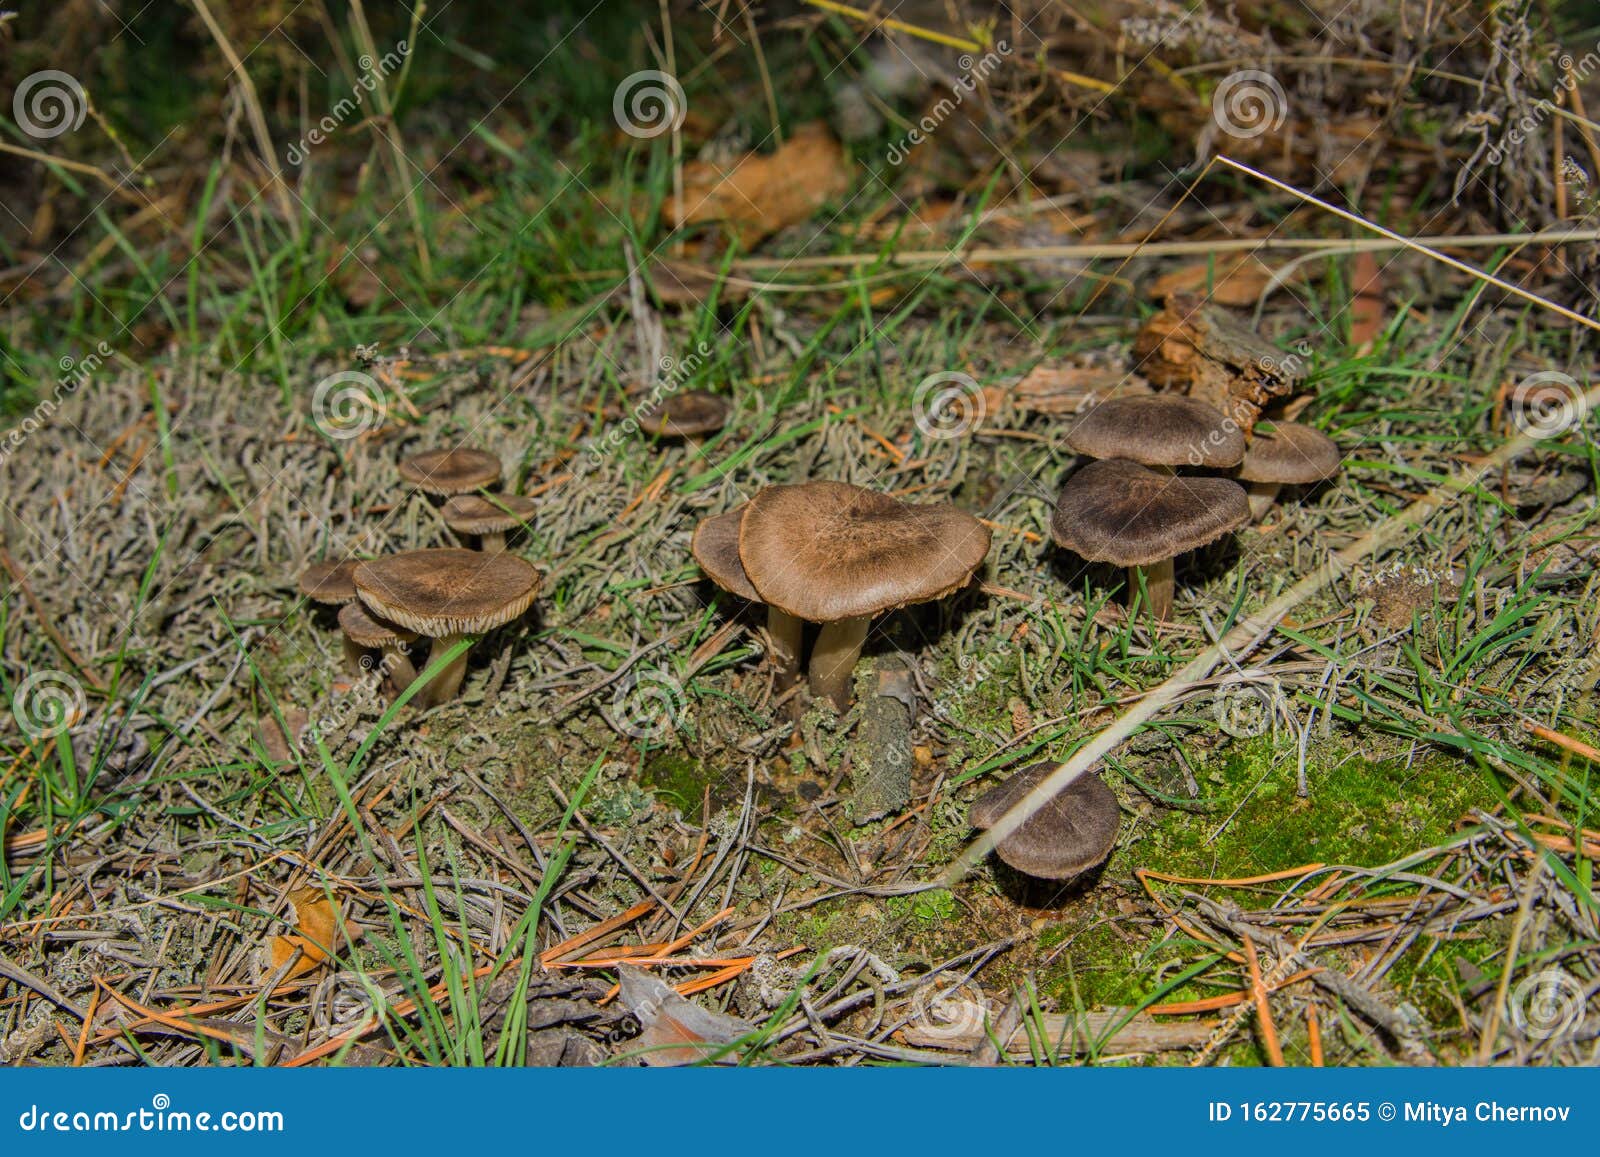 the fungus tricholoma triste grows in pine forests. mushrooms close up.